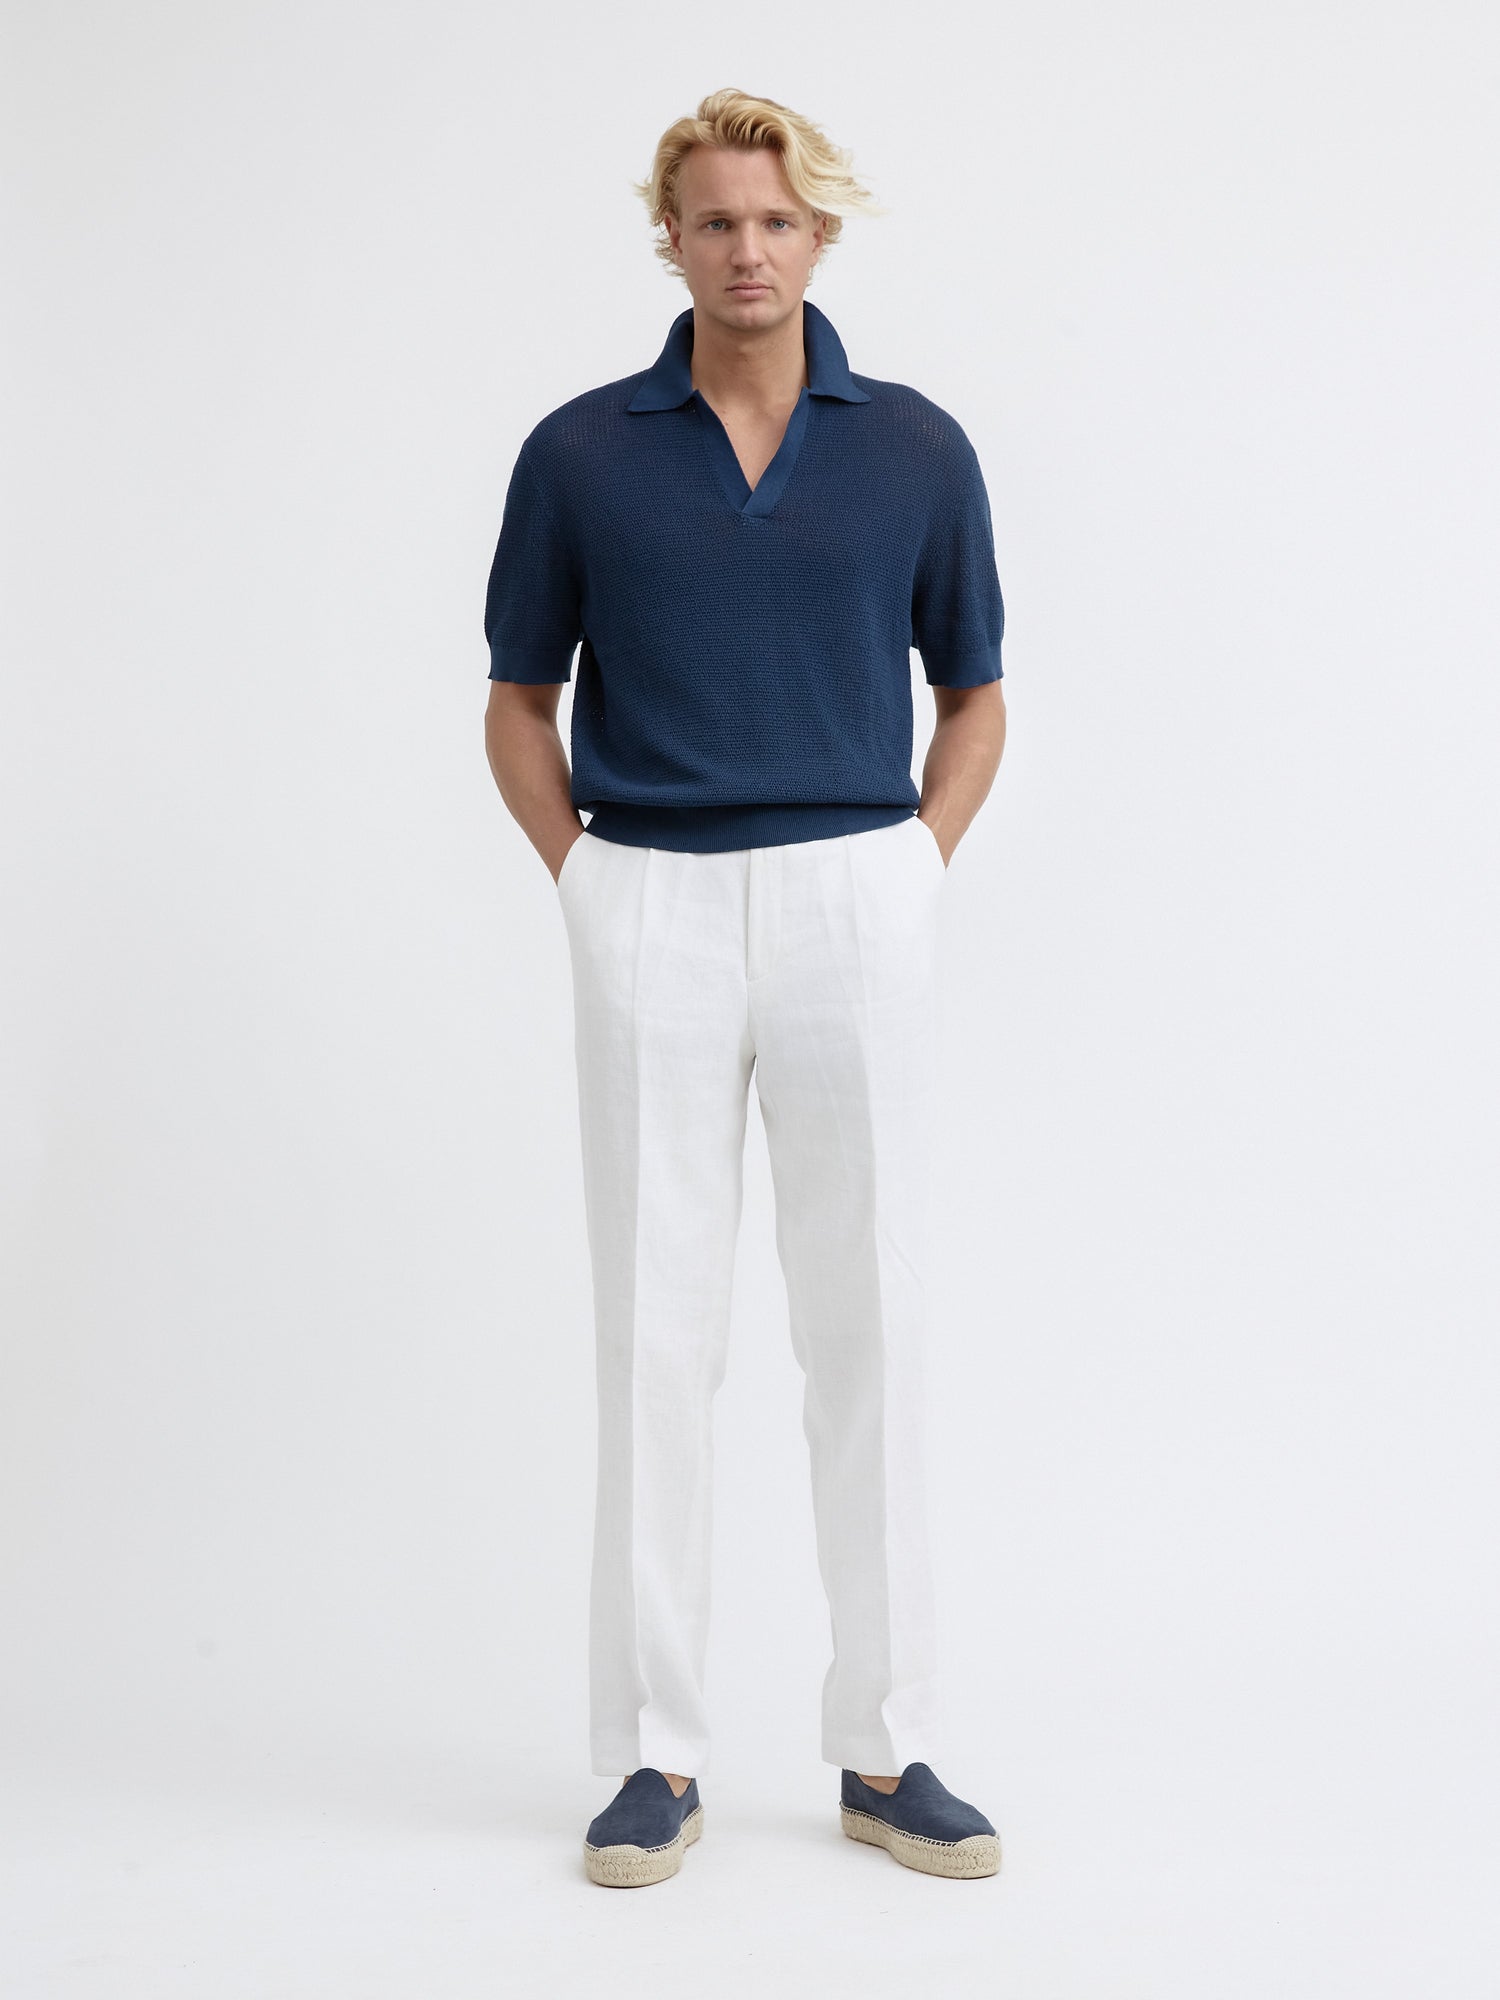 Navy Knitted Short Sleeve Jersey - Grand Le Mar